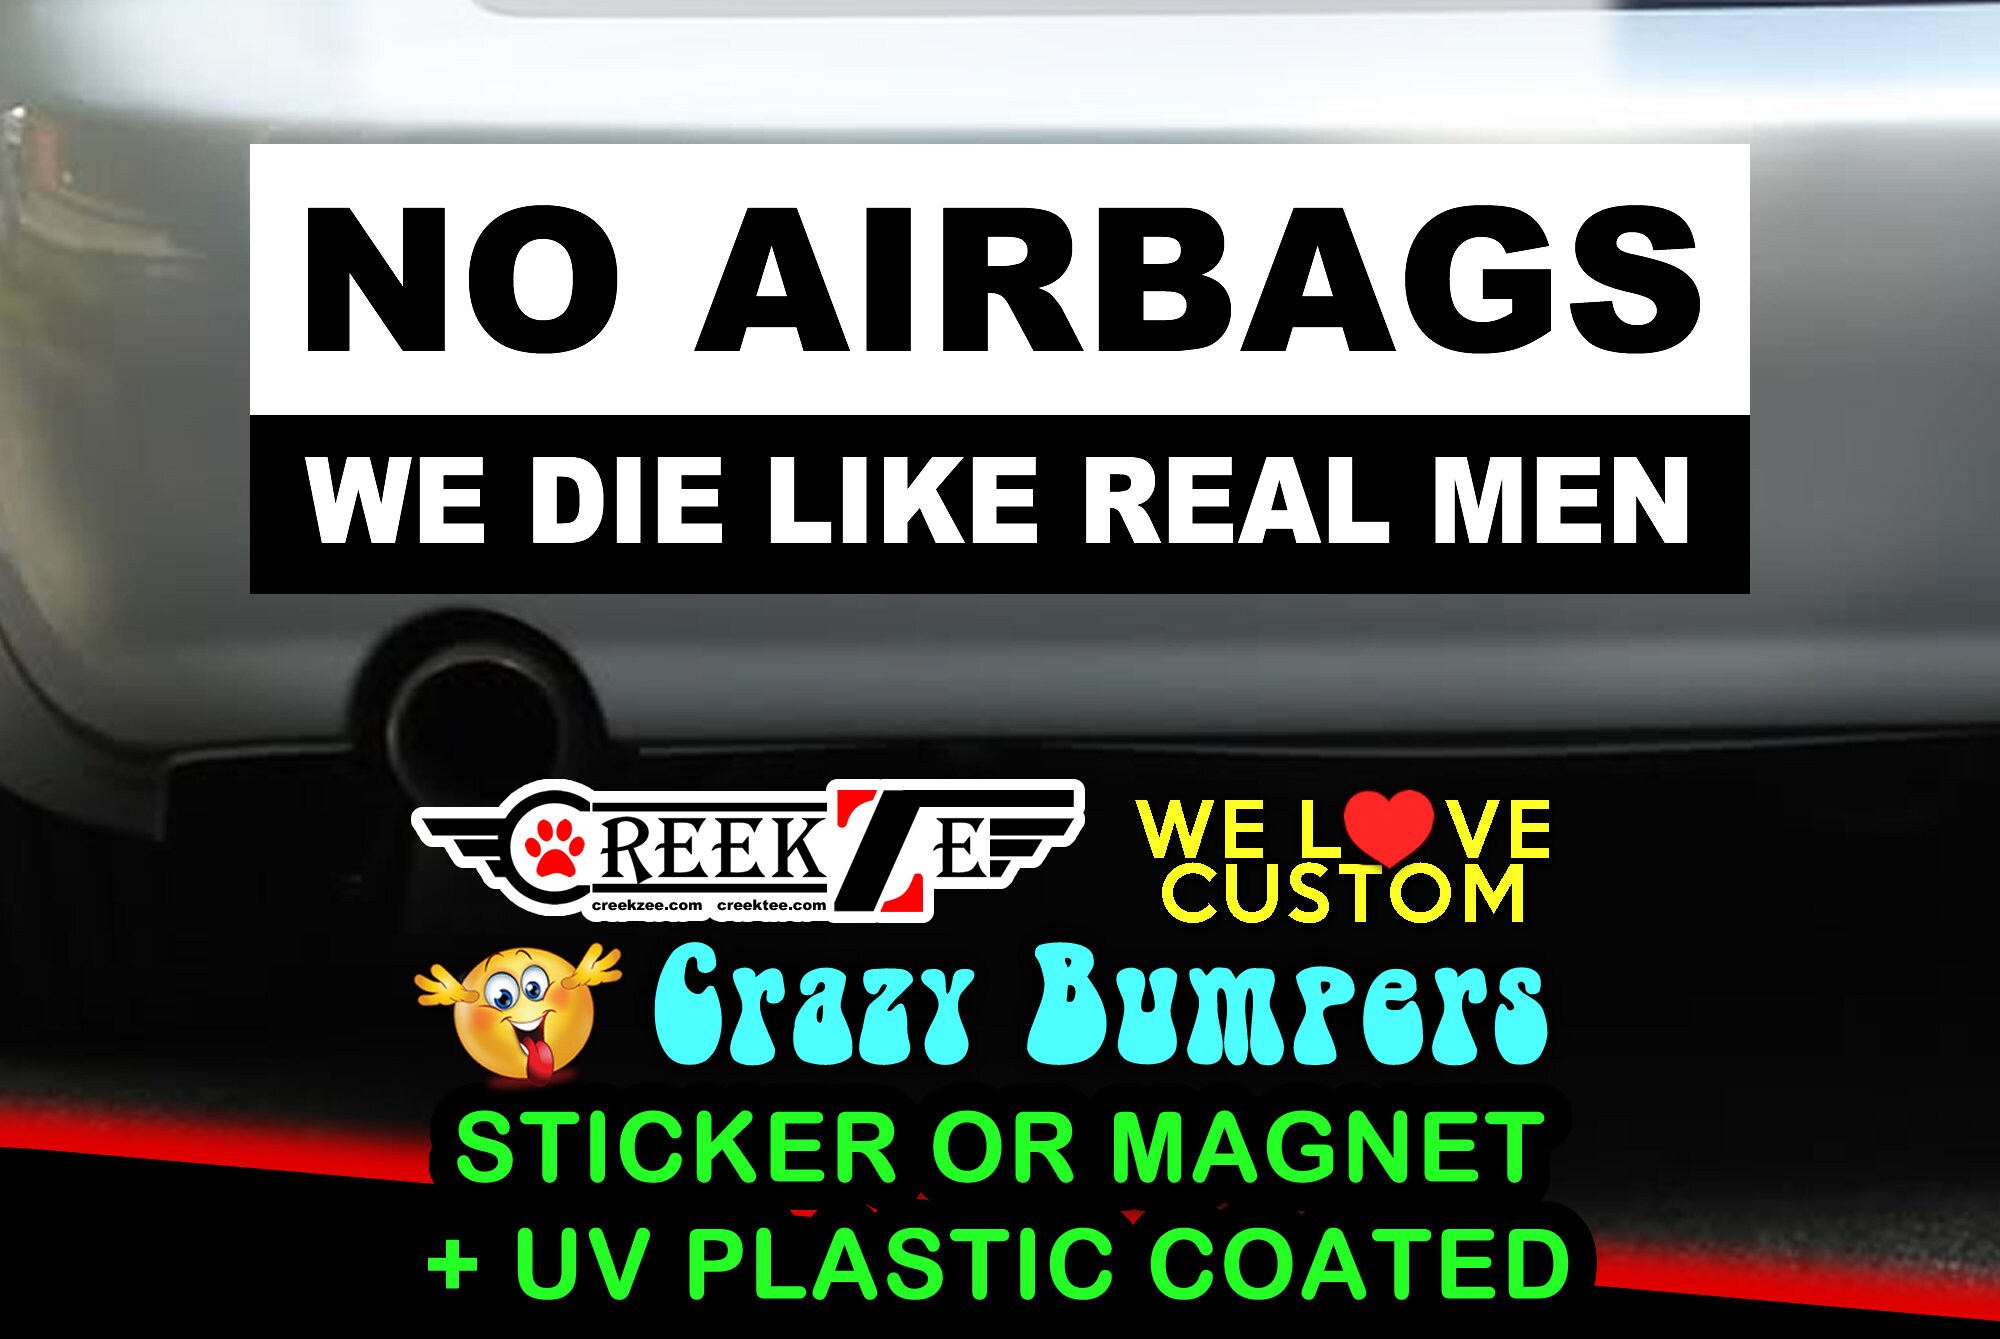 No airbags, we die like real men - Funny Bumper Sticker or Magnet sizes 4